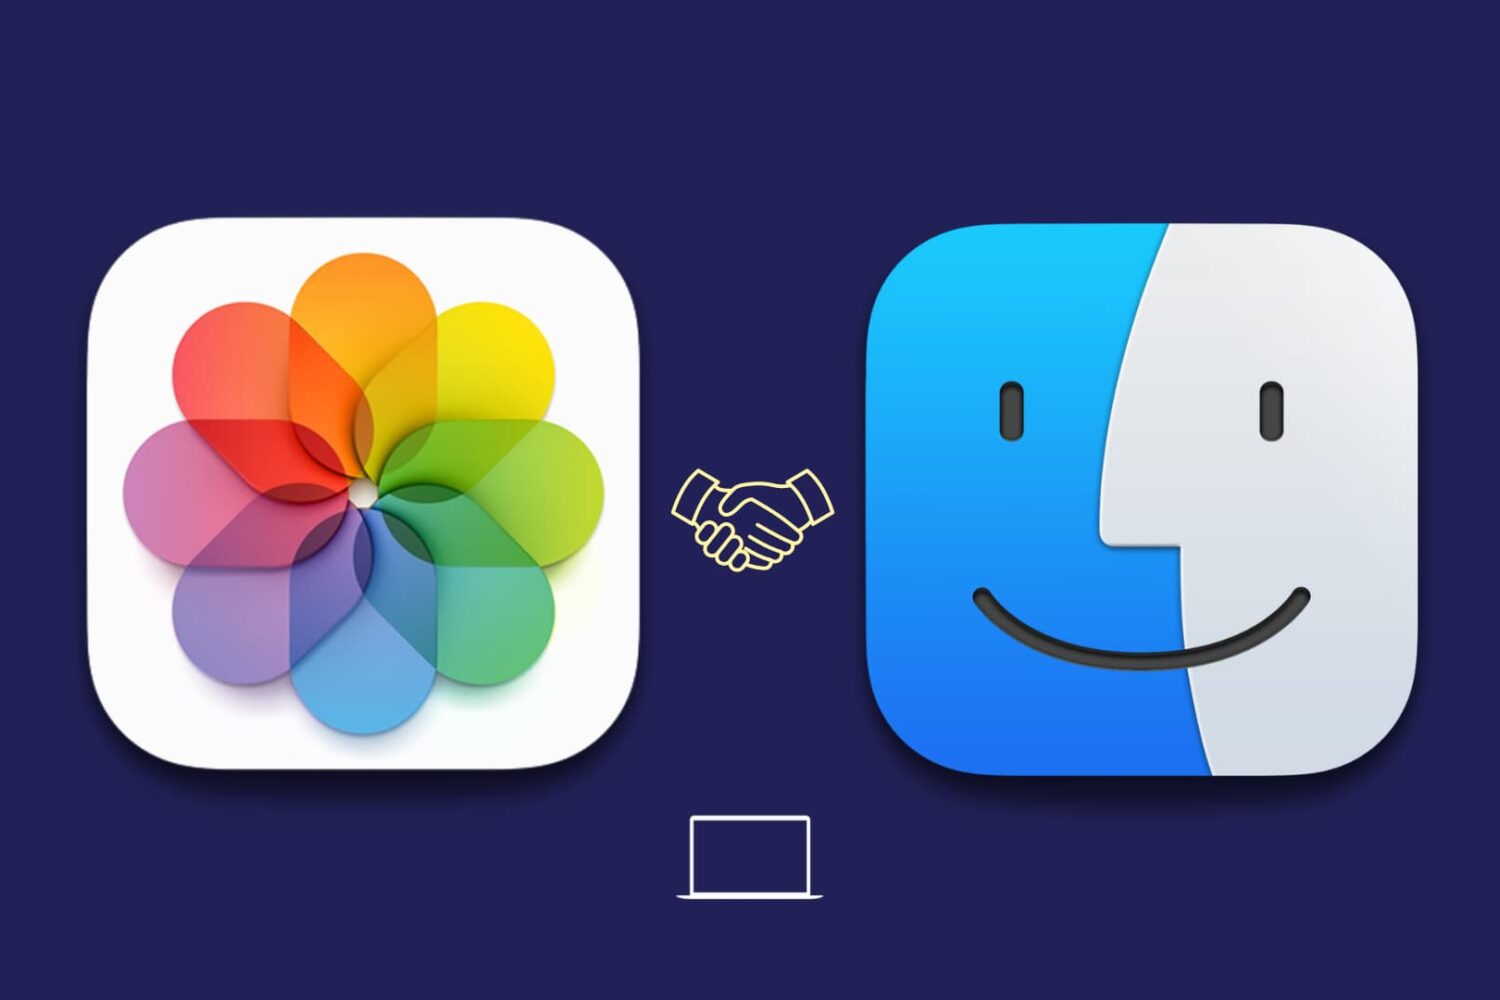 Mac Photos and Finder icons with a handshake symbol between them